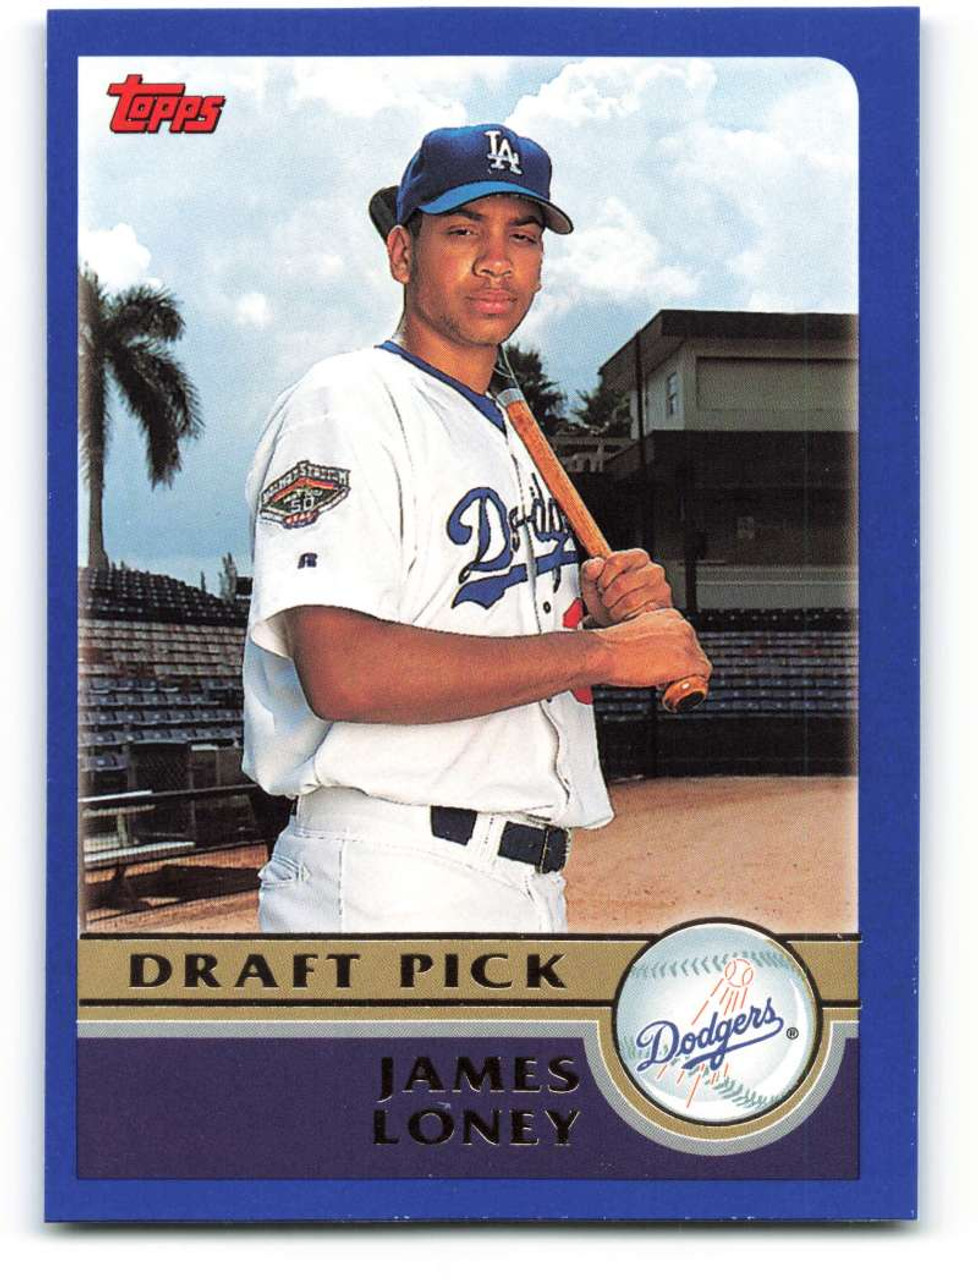 2003 Topps #672 James Loney VG RC Rookie Los Angeles Dodgers